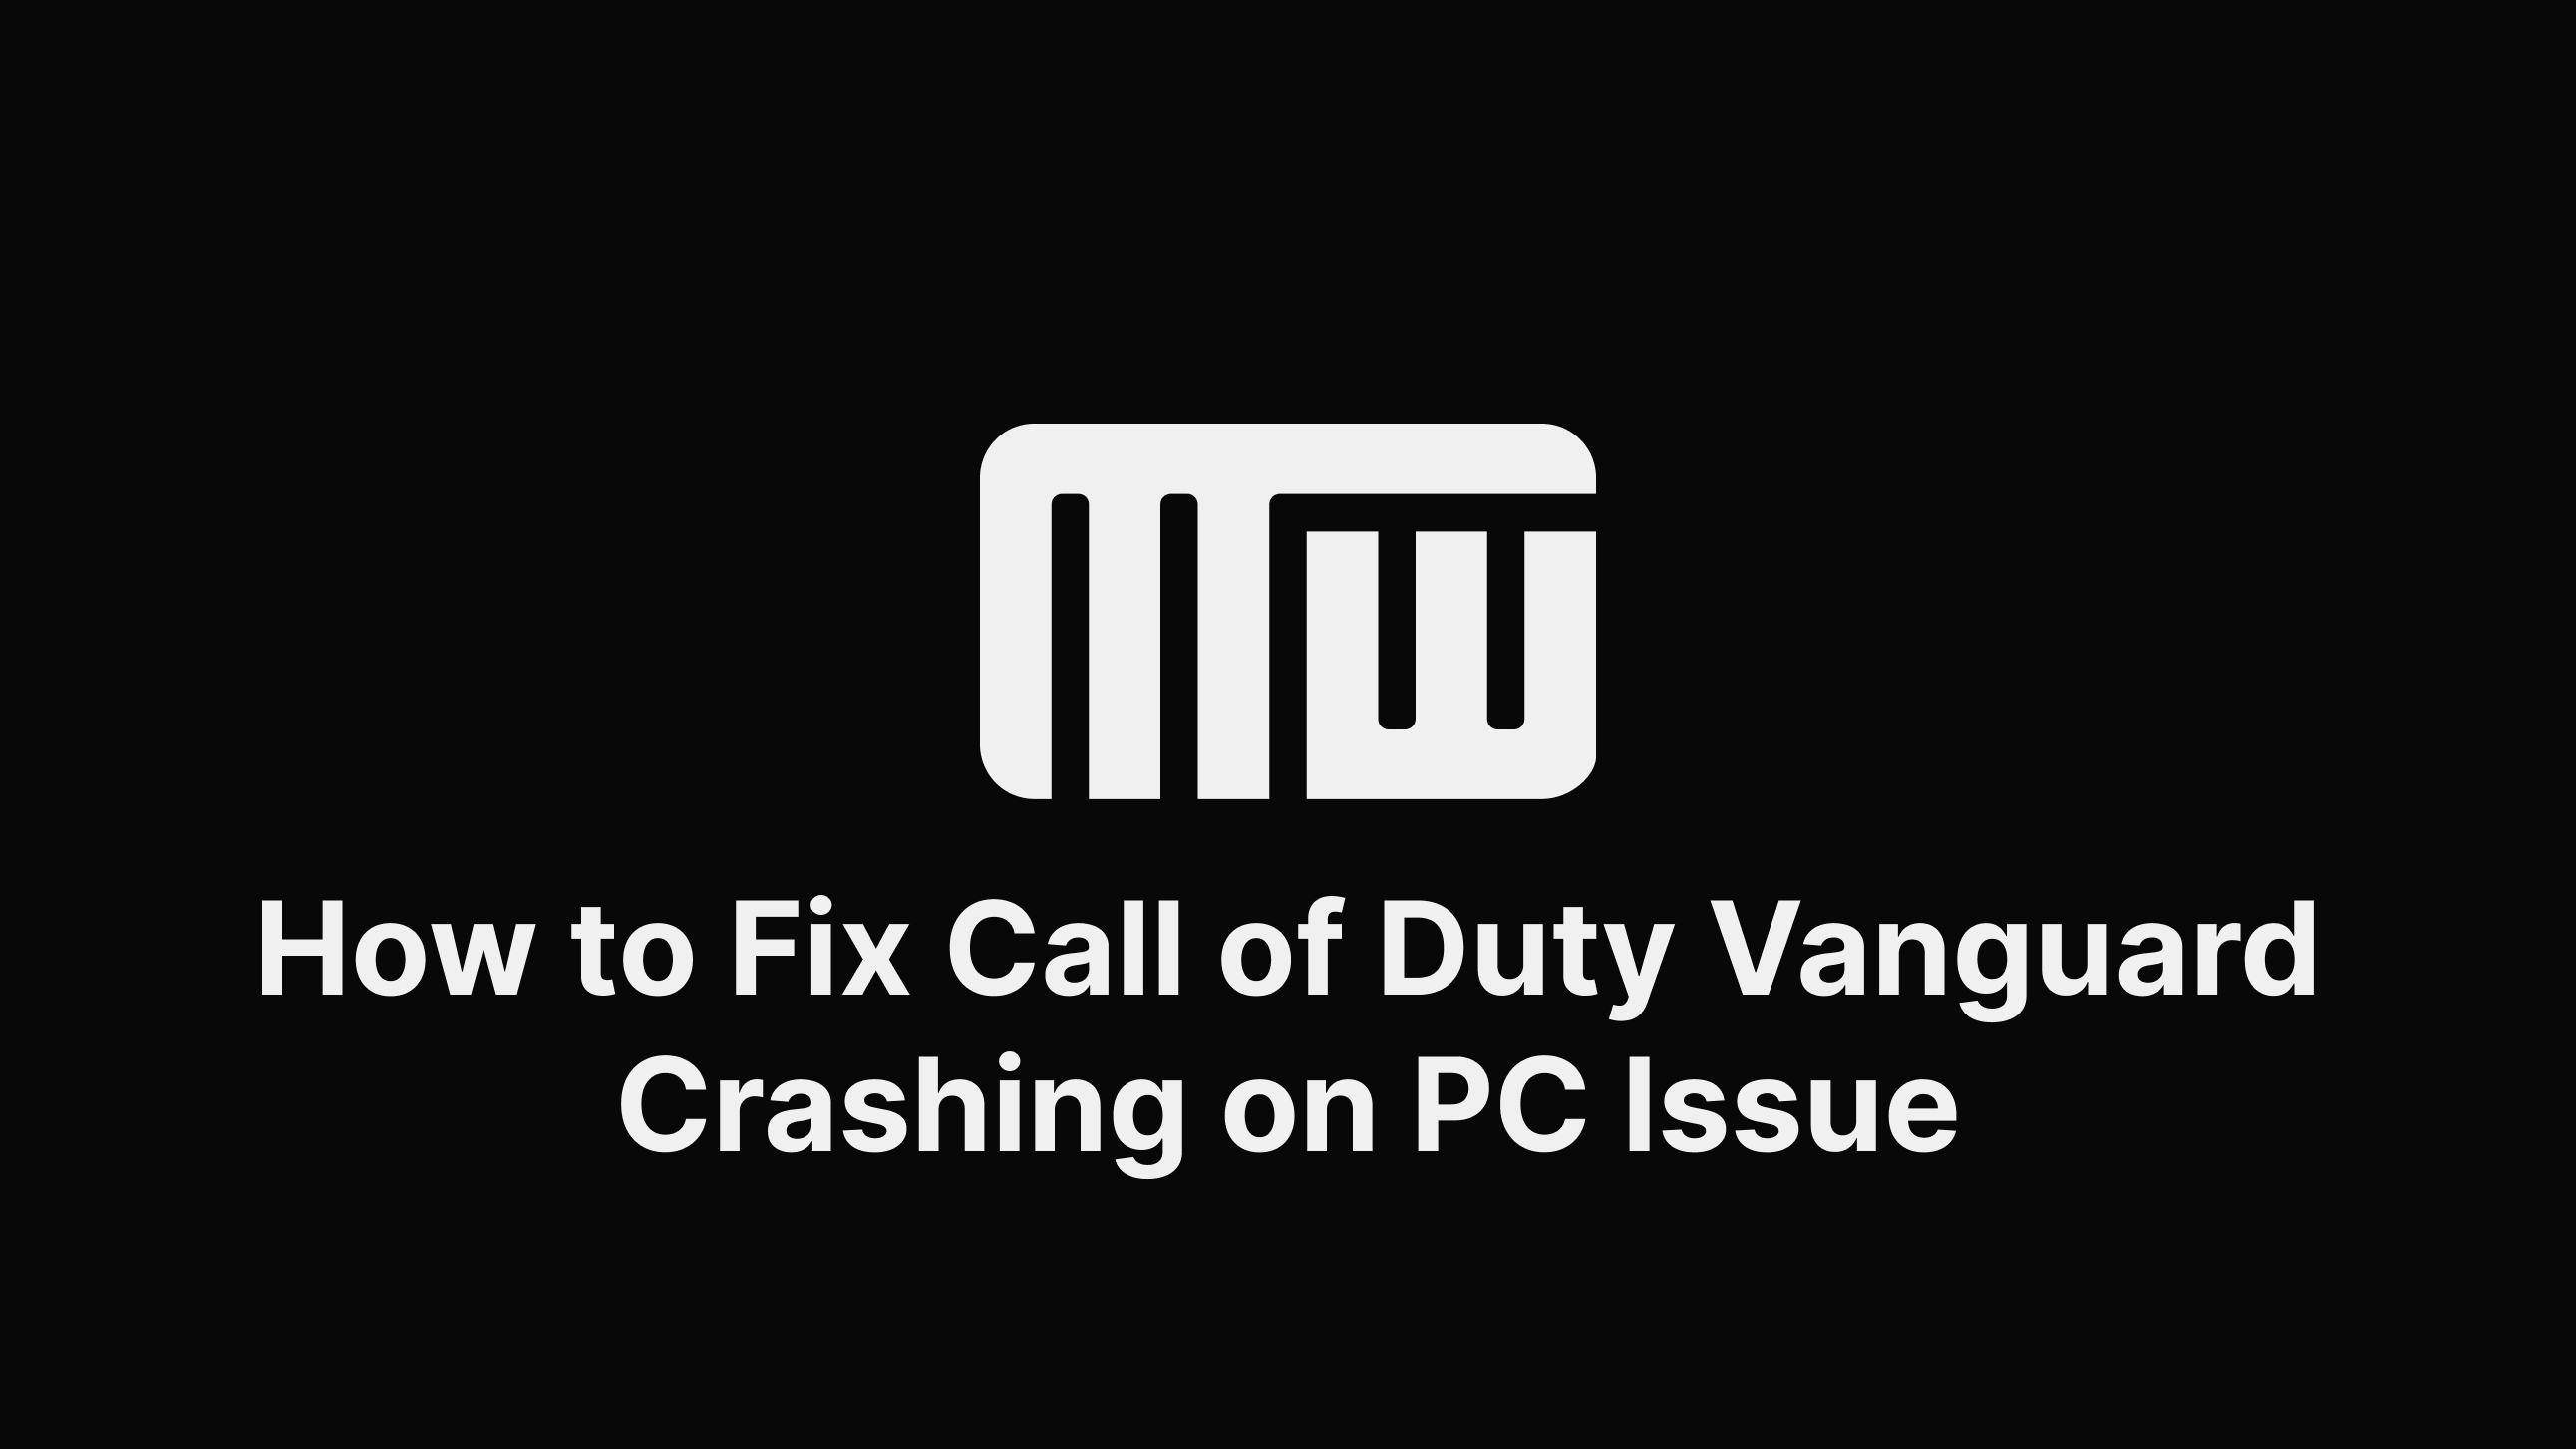 How to Fix Call of Duty Vanguard Crashing on PC Issue